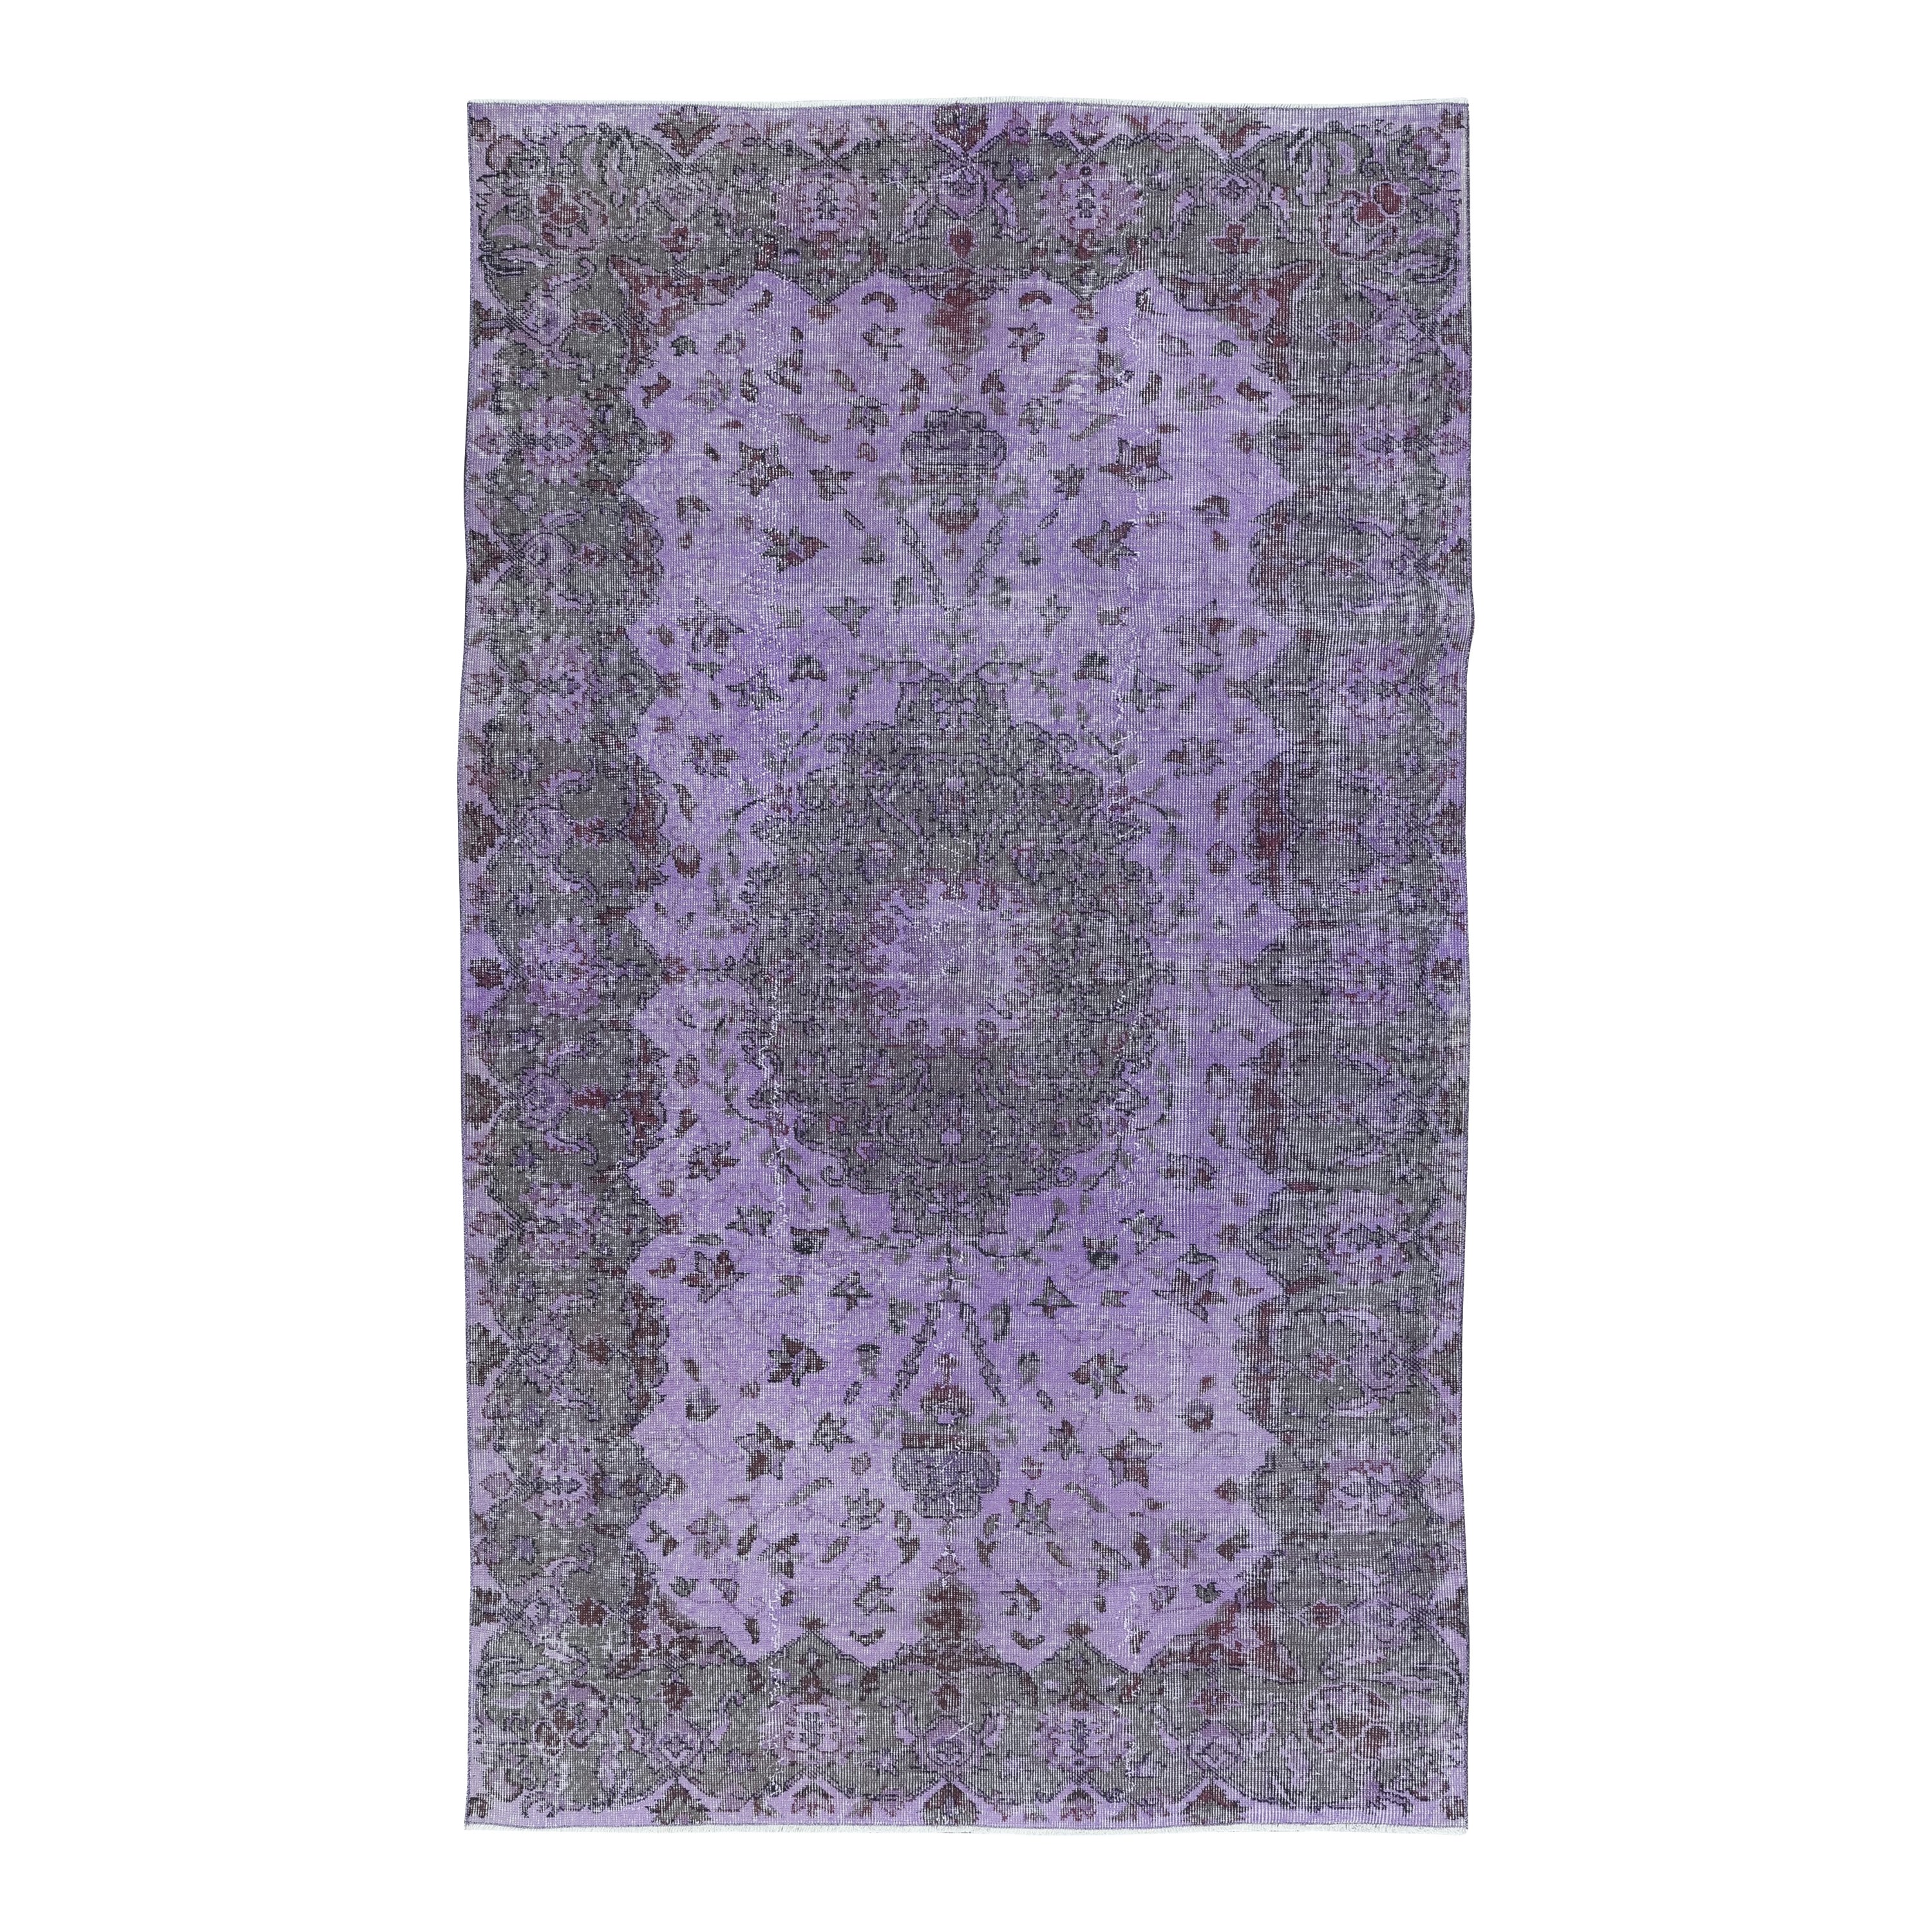 5.3x8.8 Ft Modern Purple Area Rug, Handknotted and Handwoven in Turkey For Sale